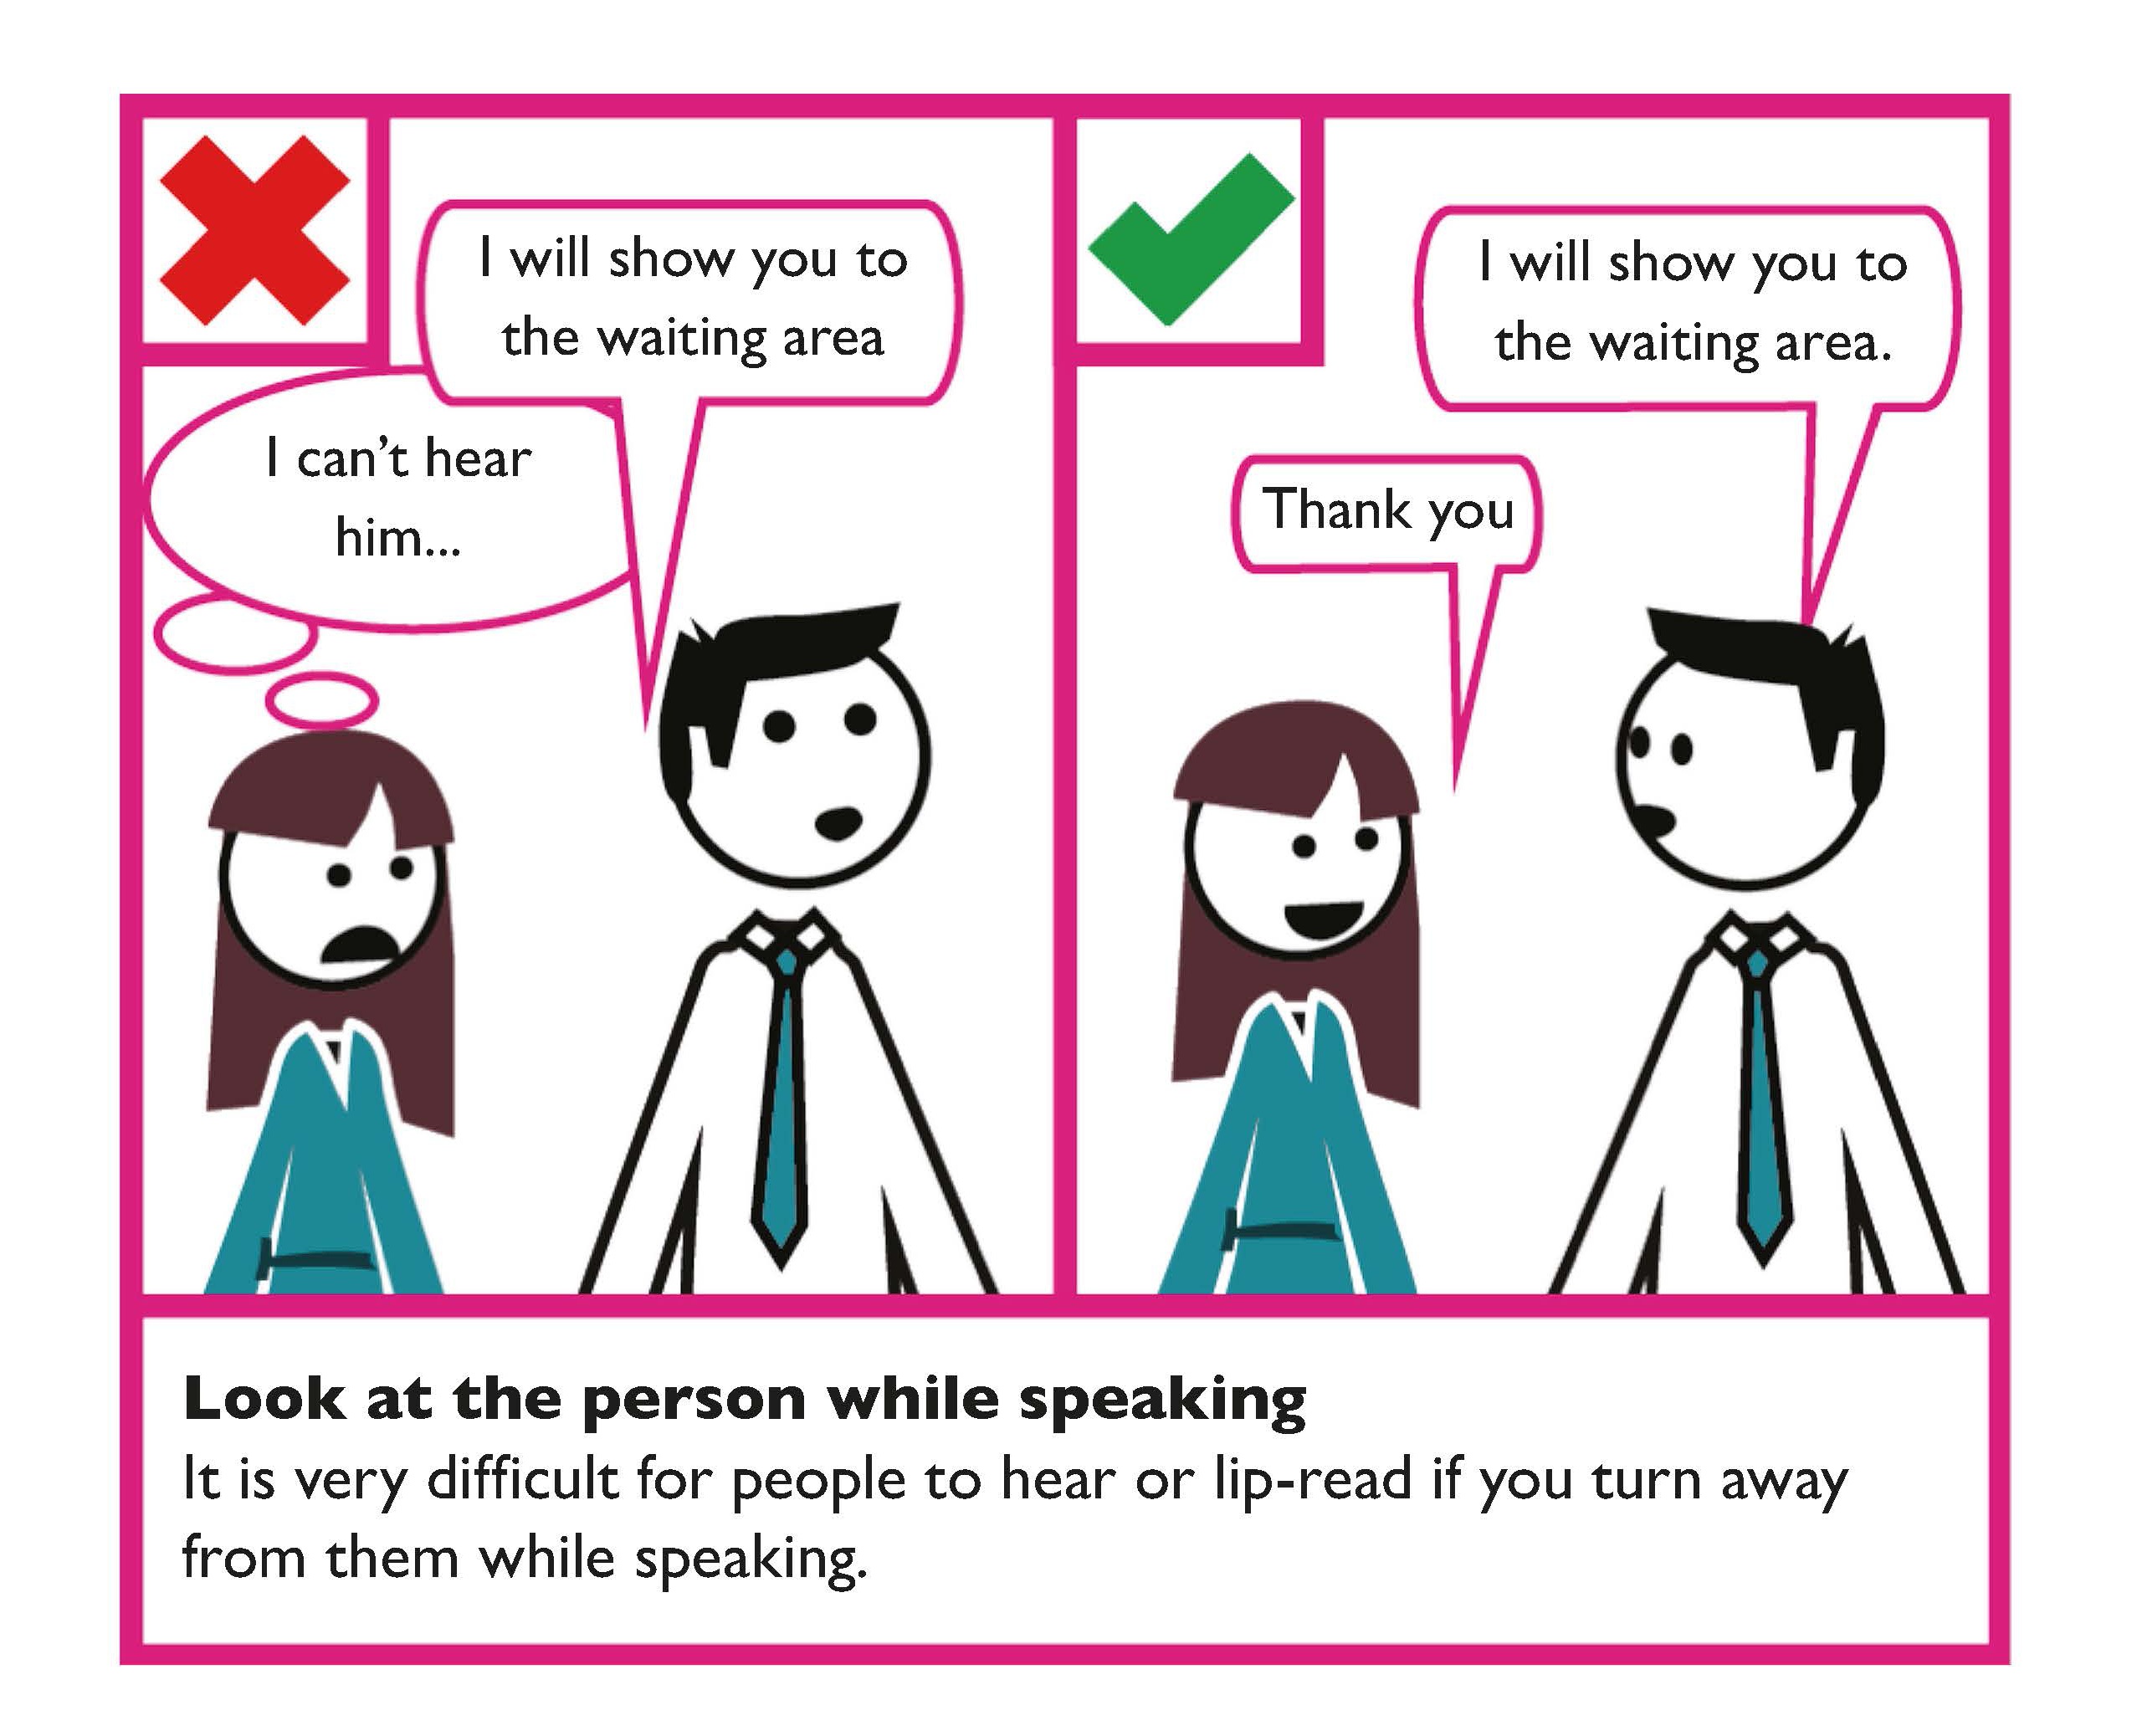 Example of good verbal communication. Always look at a person when speaking to them, it is very difficult for people to hear or to lip read if you turn away from them while speaking.